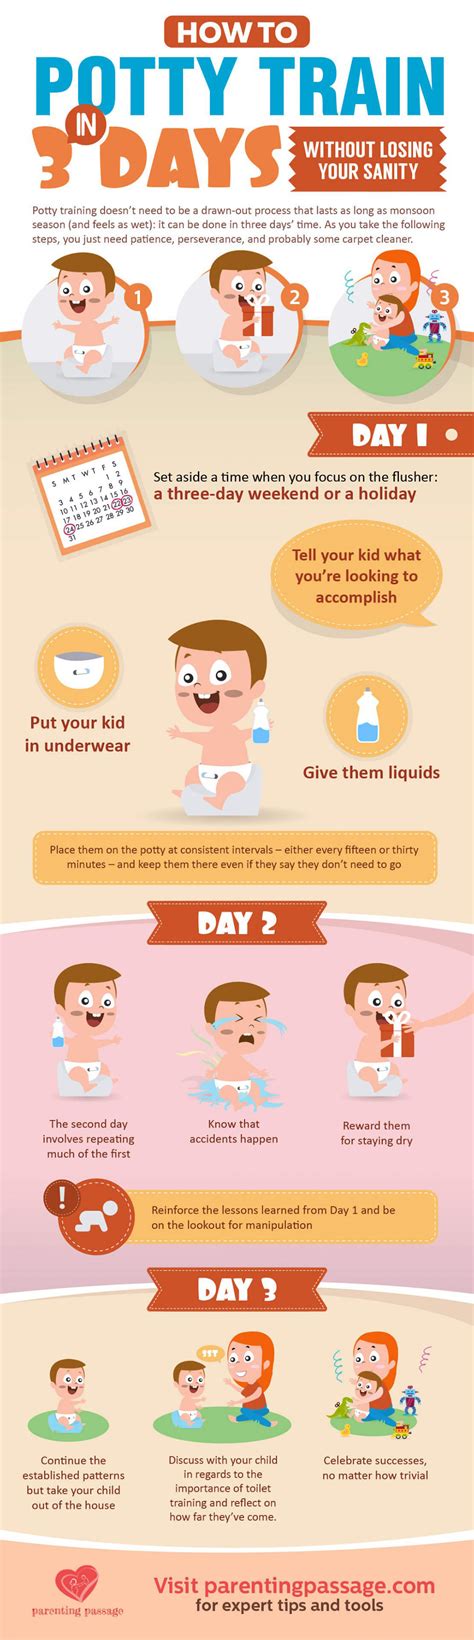 Infographic On How To Potty Train In 3 Days Without Losing Your Sanity